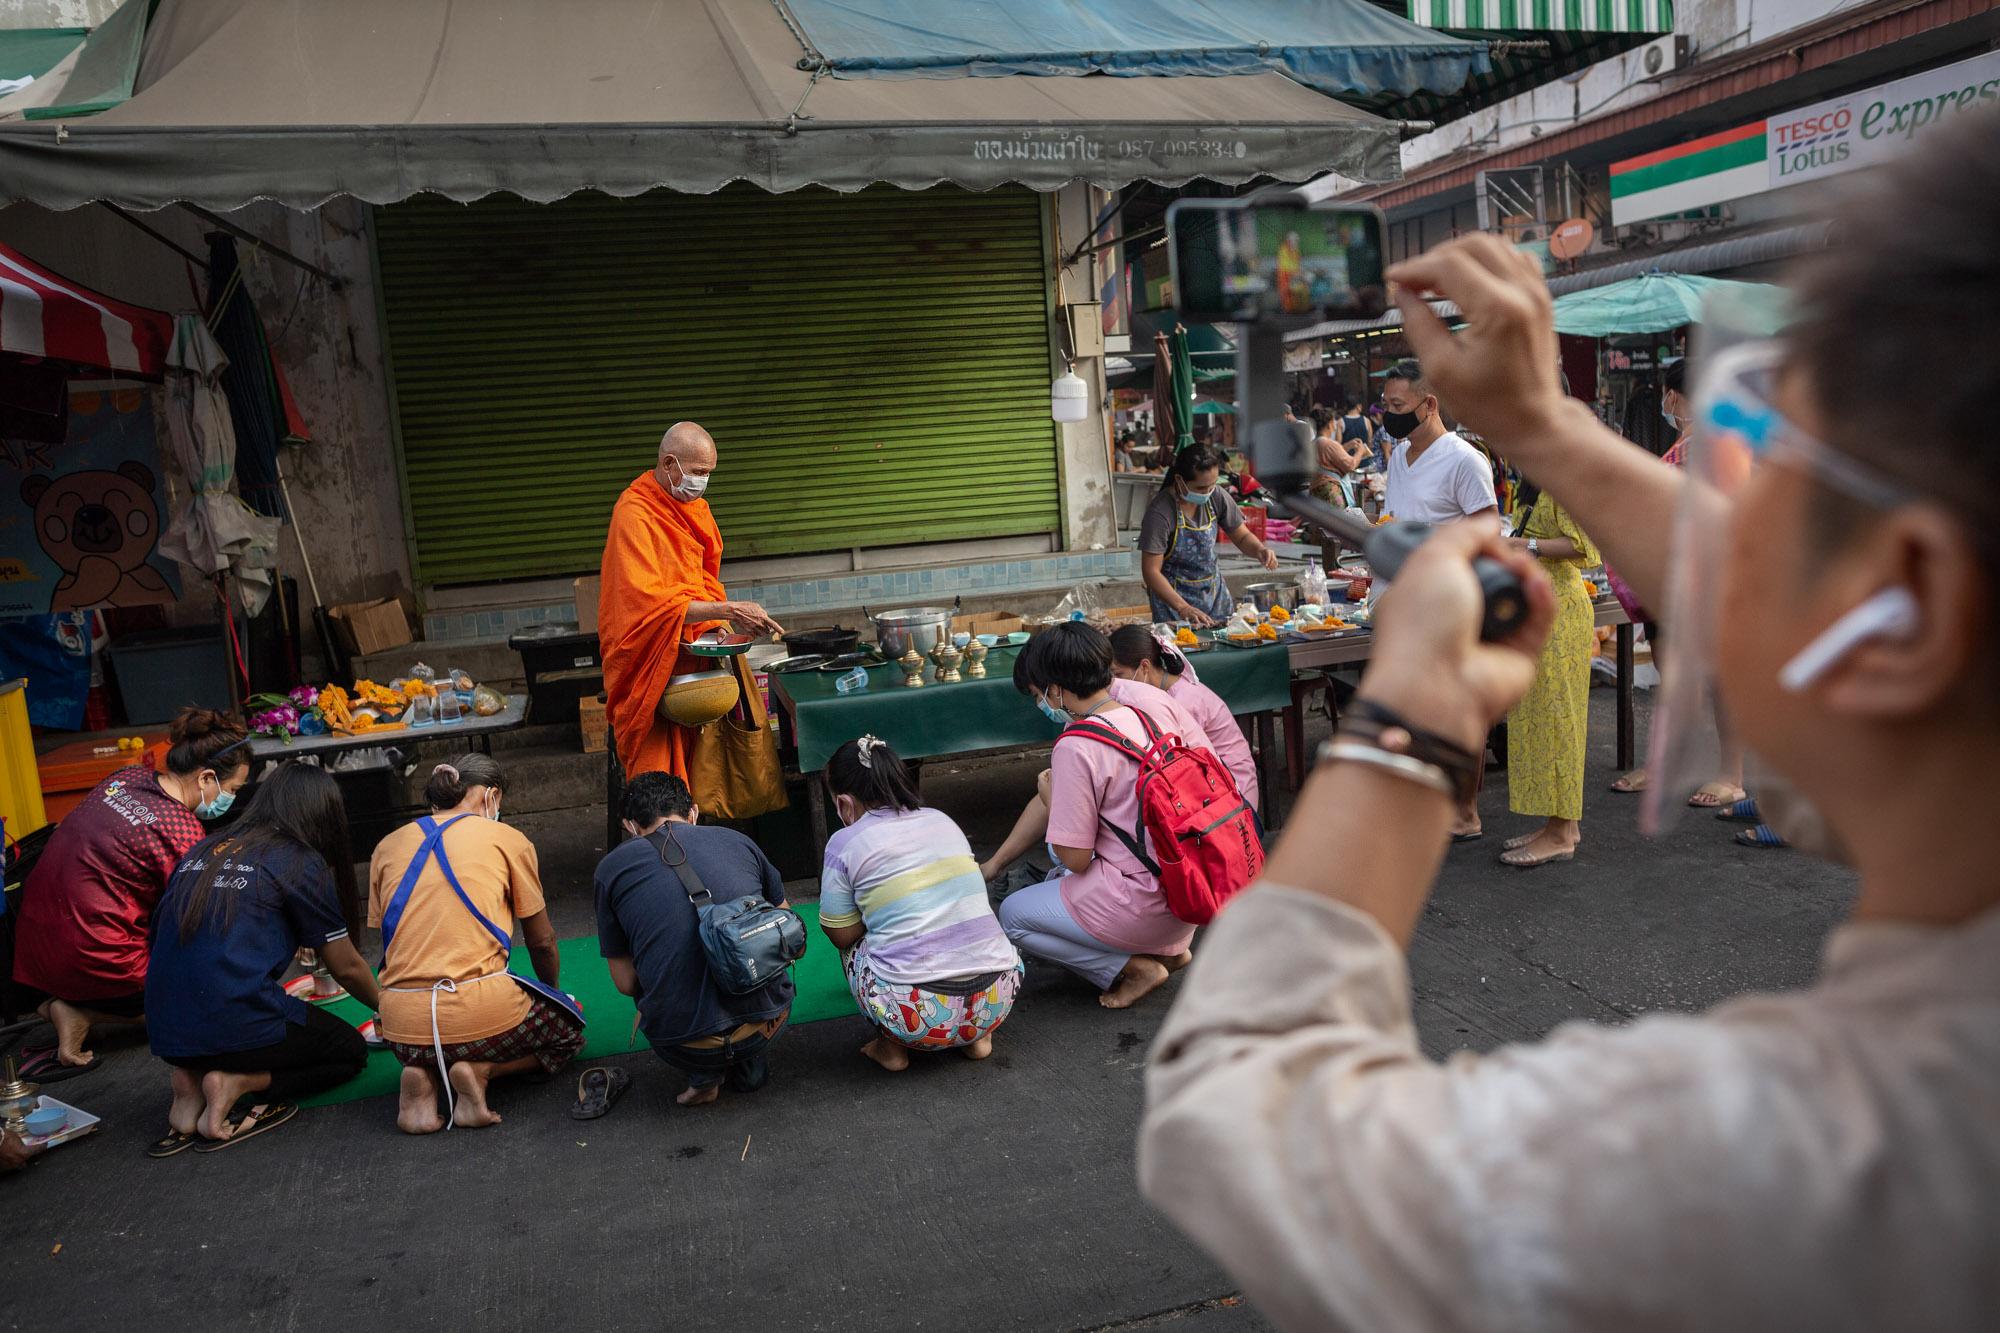 Hnoi Latthitham, 53, shows participants of a virtual tour an example of alms offering to a Buddhist monk at Chai Chimplee Temple Market in Bangkok, Thailand, February 2021.